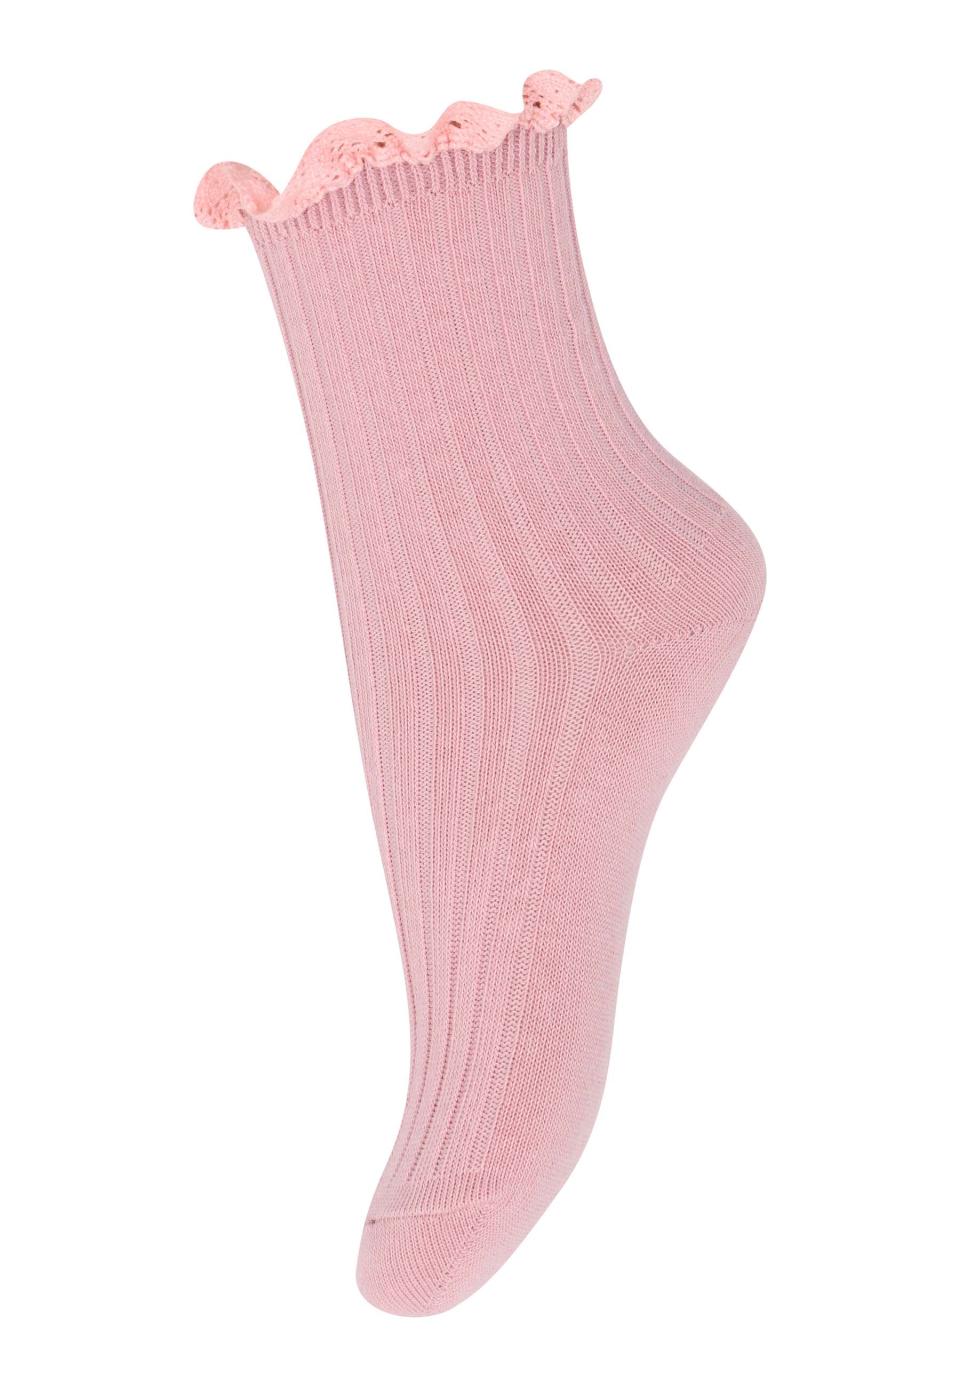 MP Denmark - julia socks with lace - 57048 4150 - silver pink